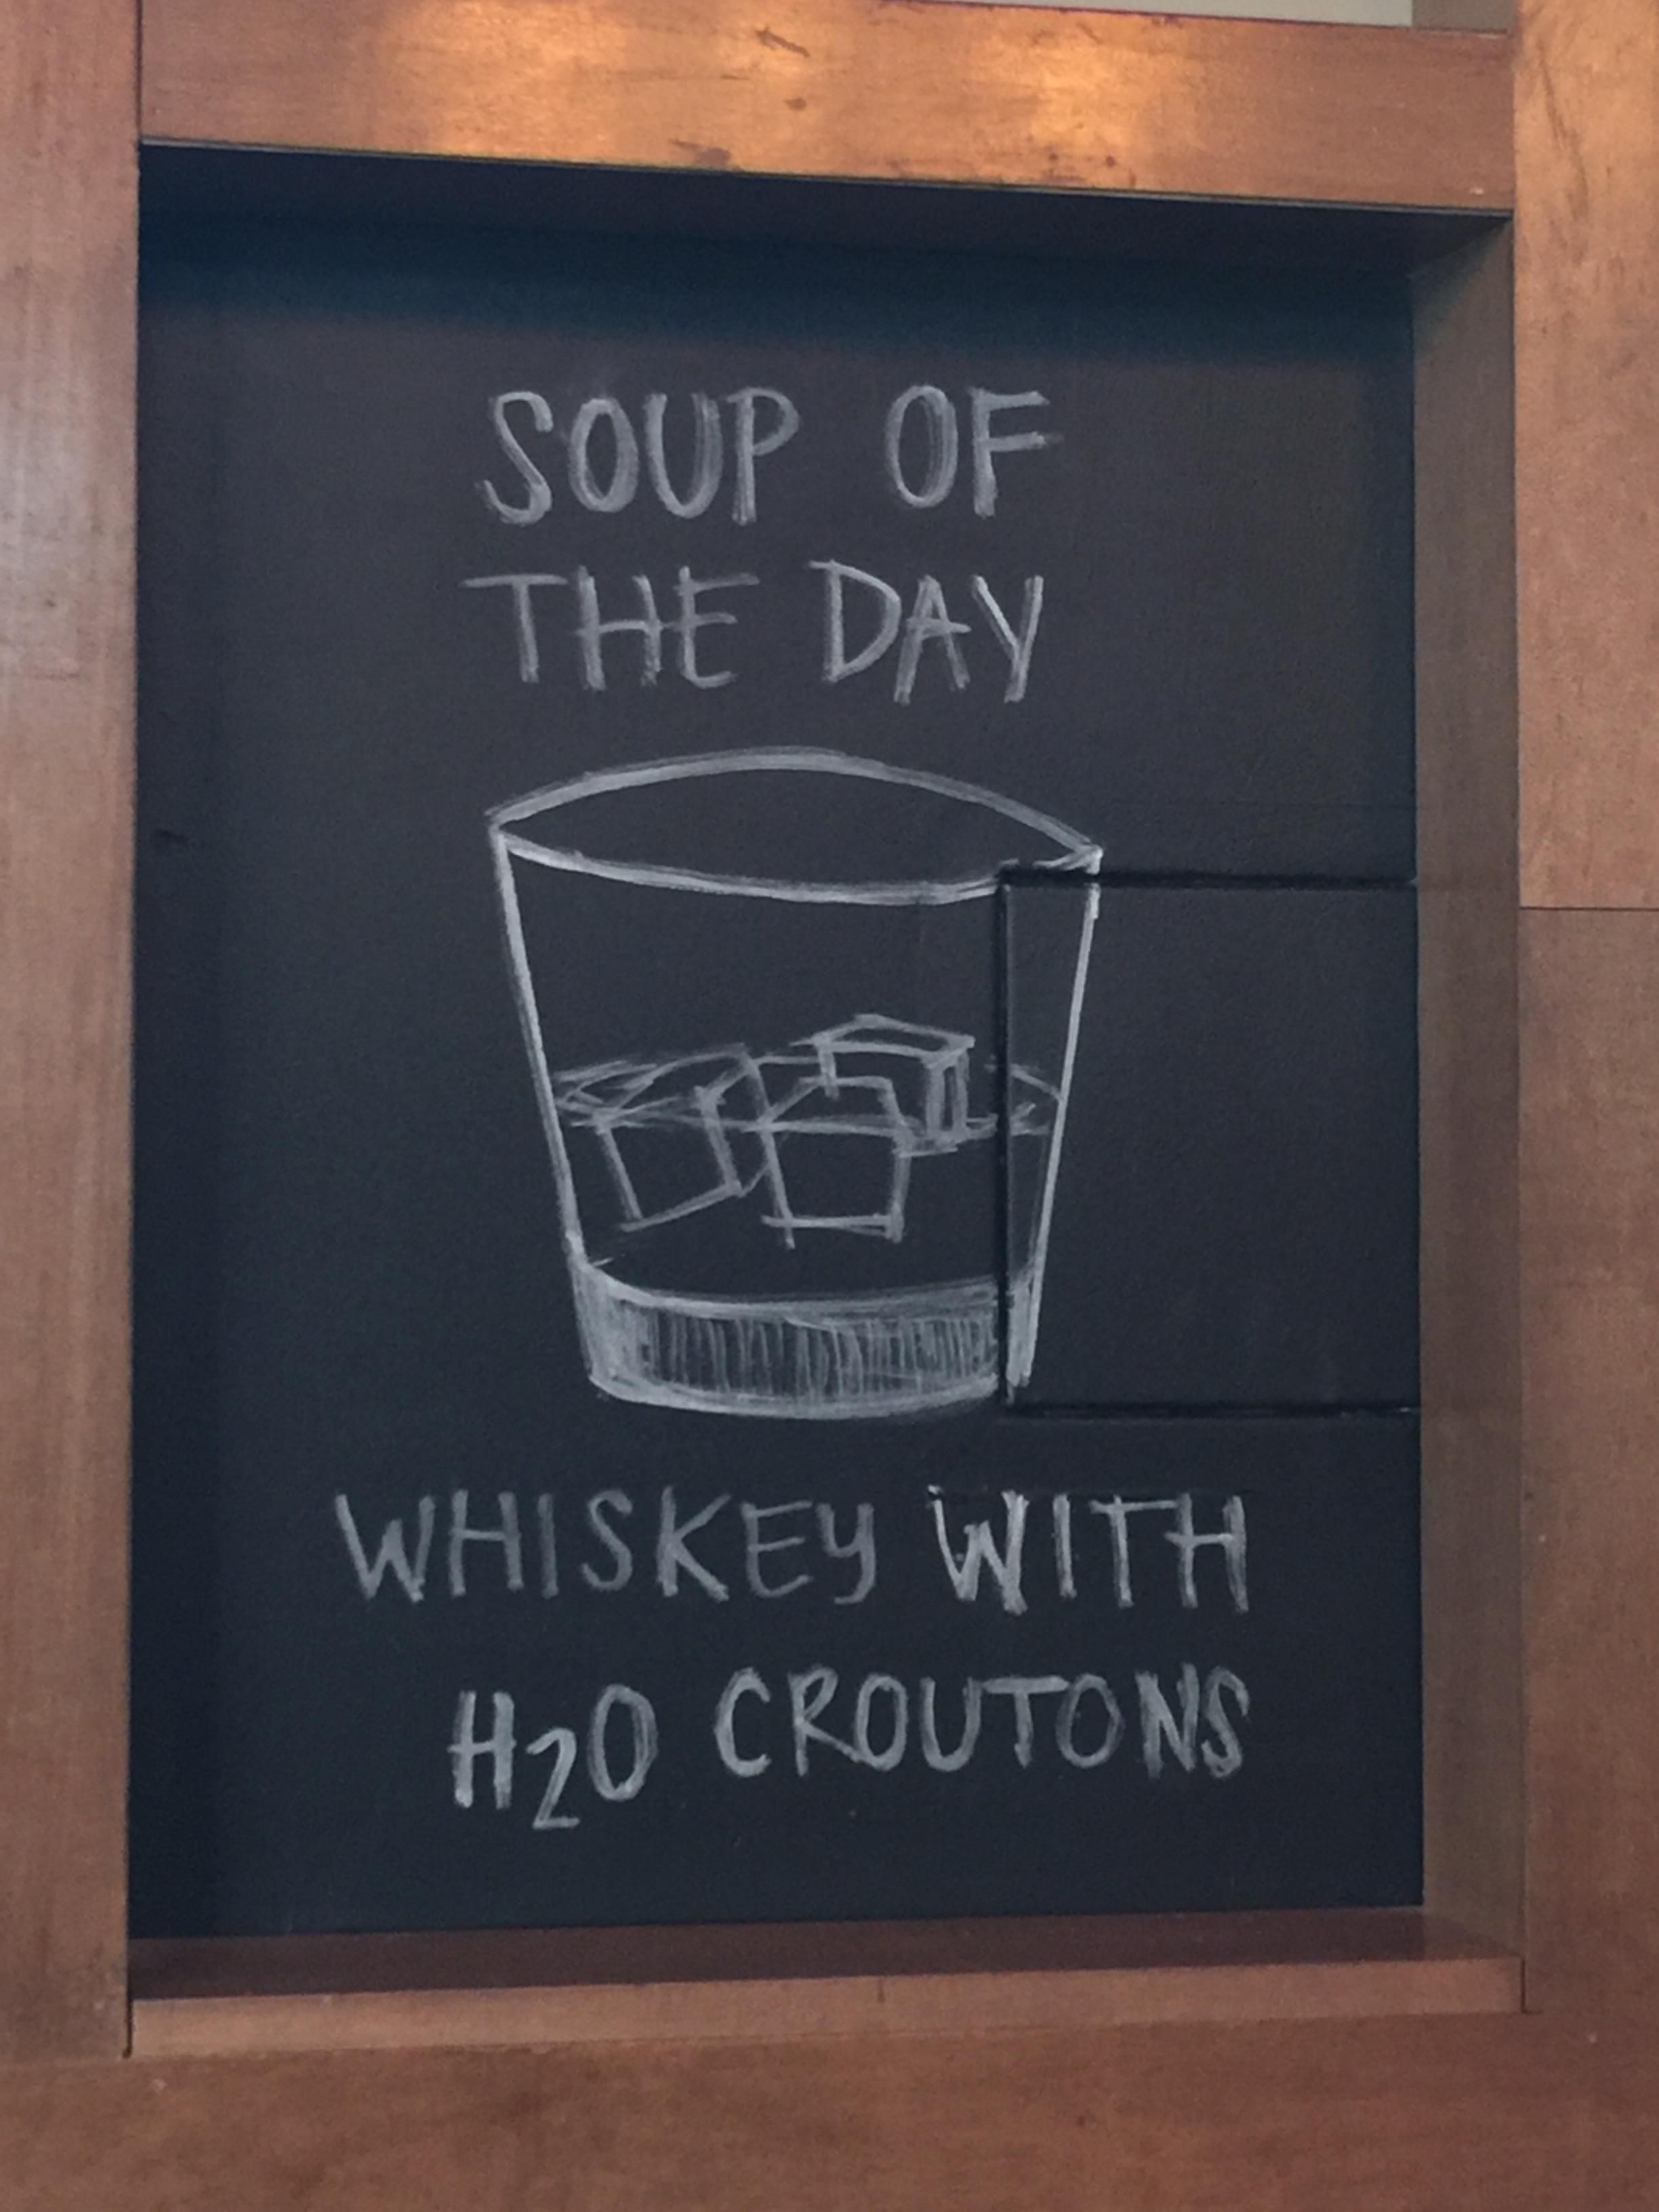 I’ll have the soup and salad, please...